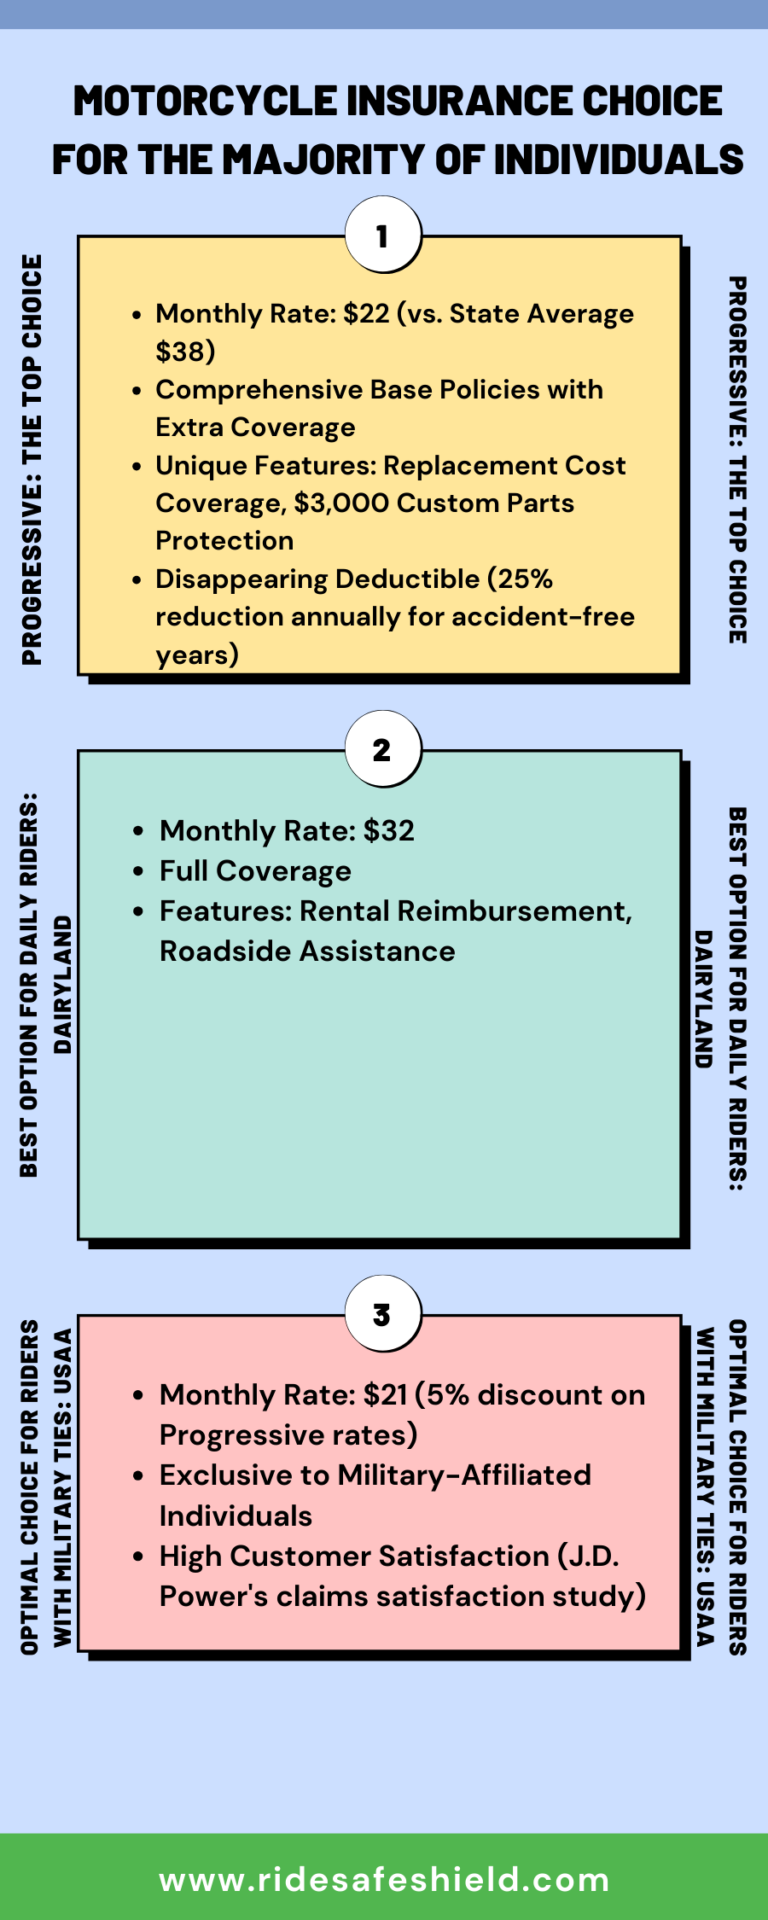 An infographic illustration of Motorcycle Insurance in Michigan